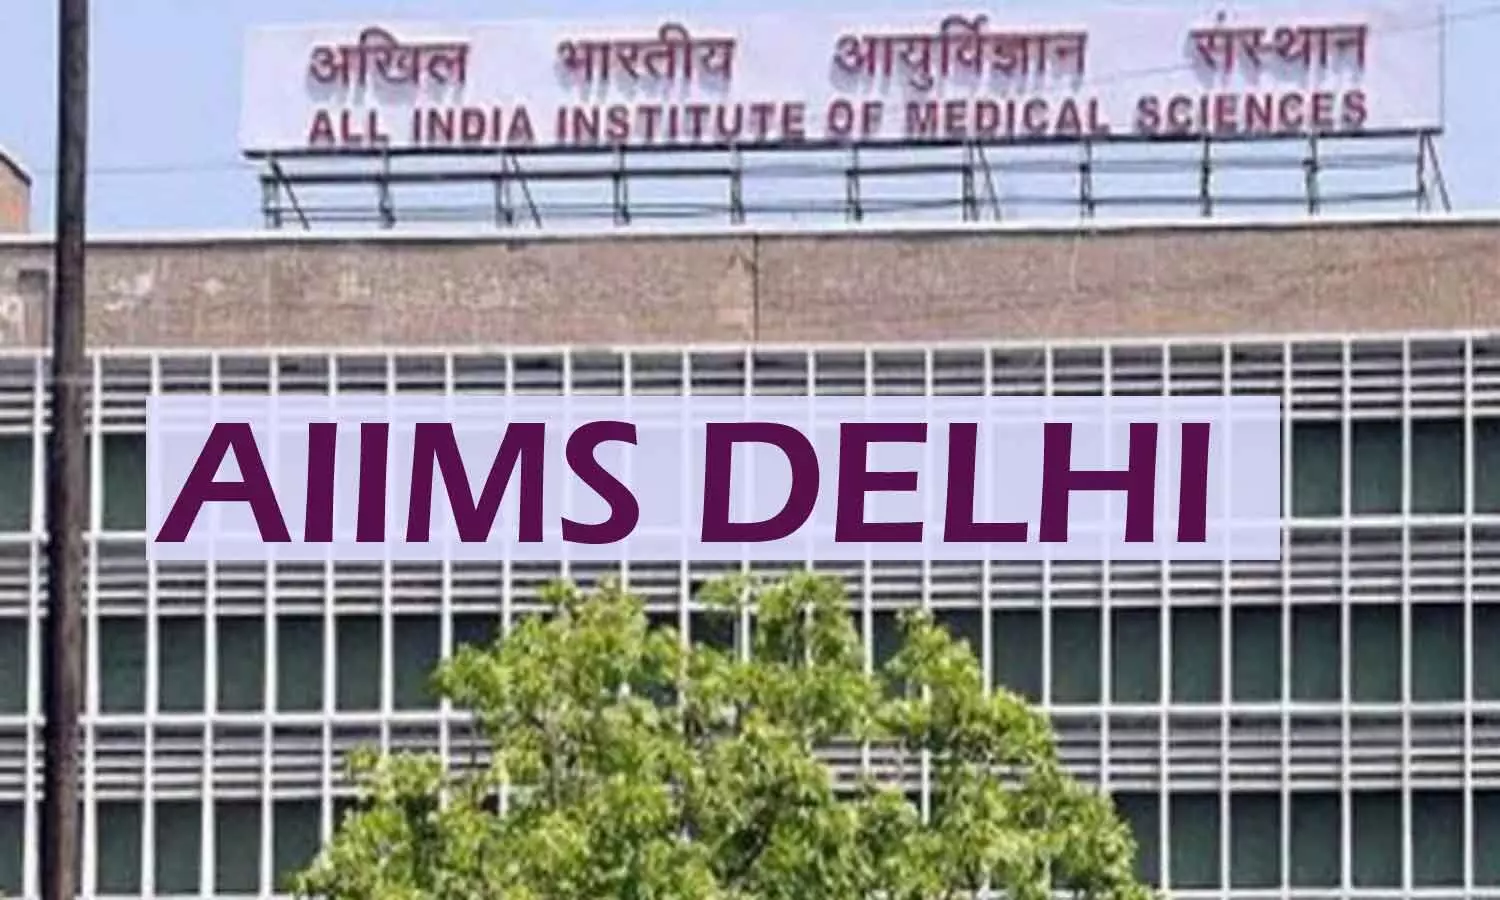 COVID-19 resurgence: AIIMS Delhi OPD services suspended for 14 days